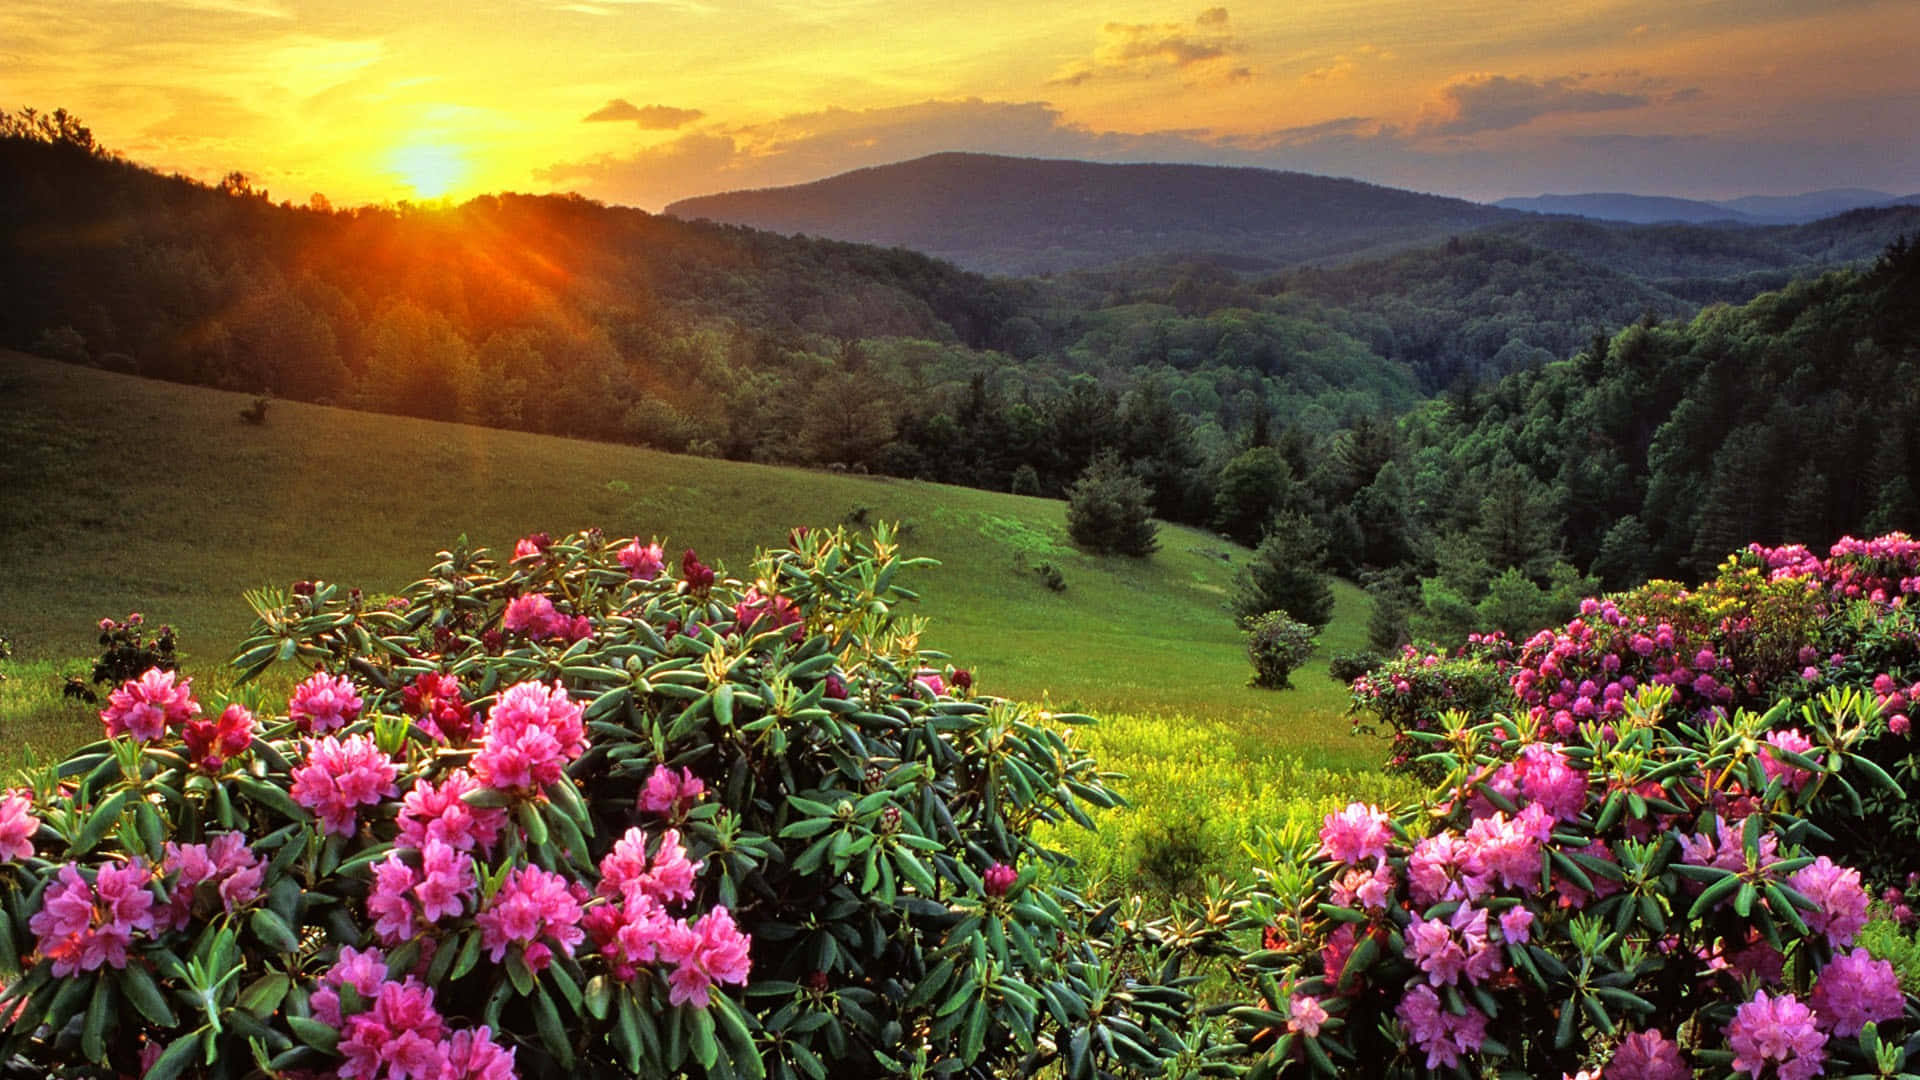 A Beautiful Sunset Over A Mountain With Pink Flowers